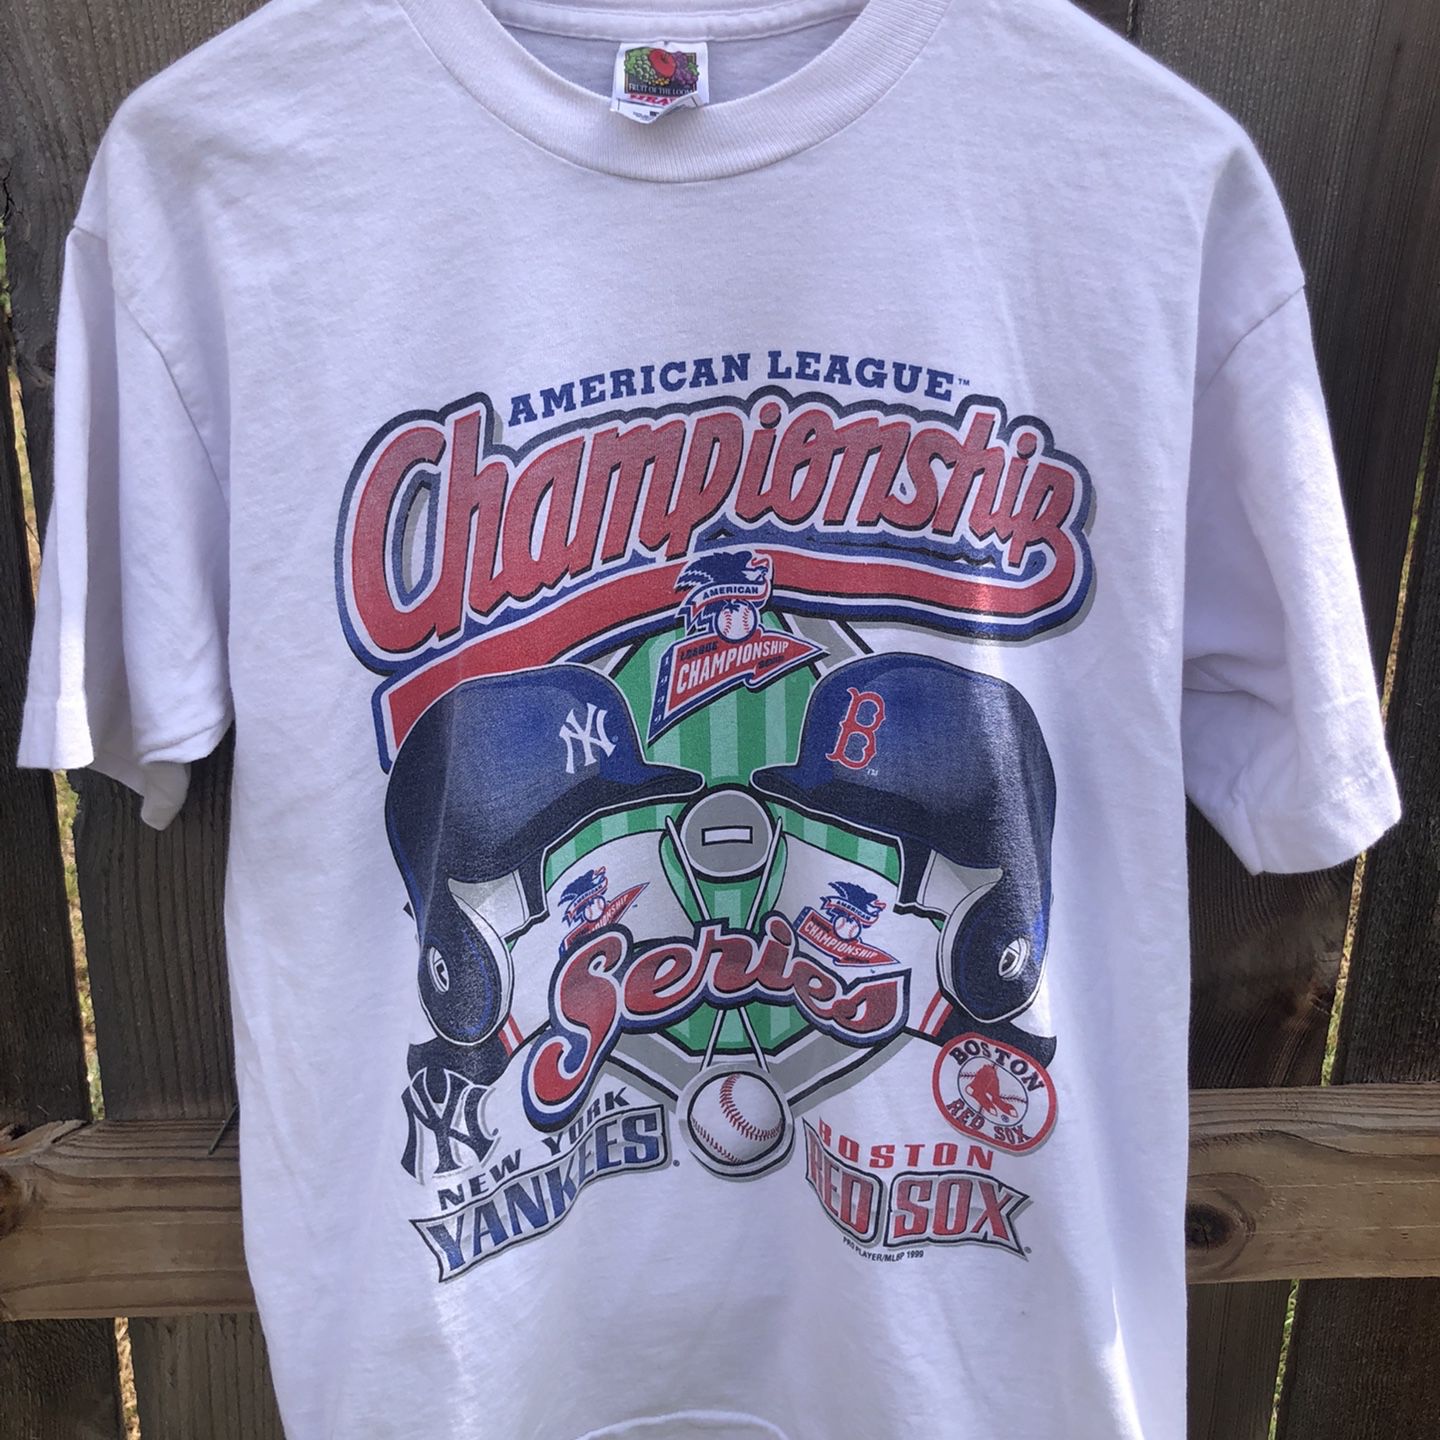 1999 Yankees vs Red Sox American League Championship Vintage T-shirt for  Sale in San Antonio, TX - OfferUp